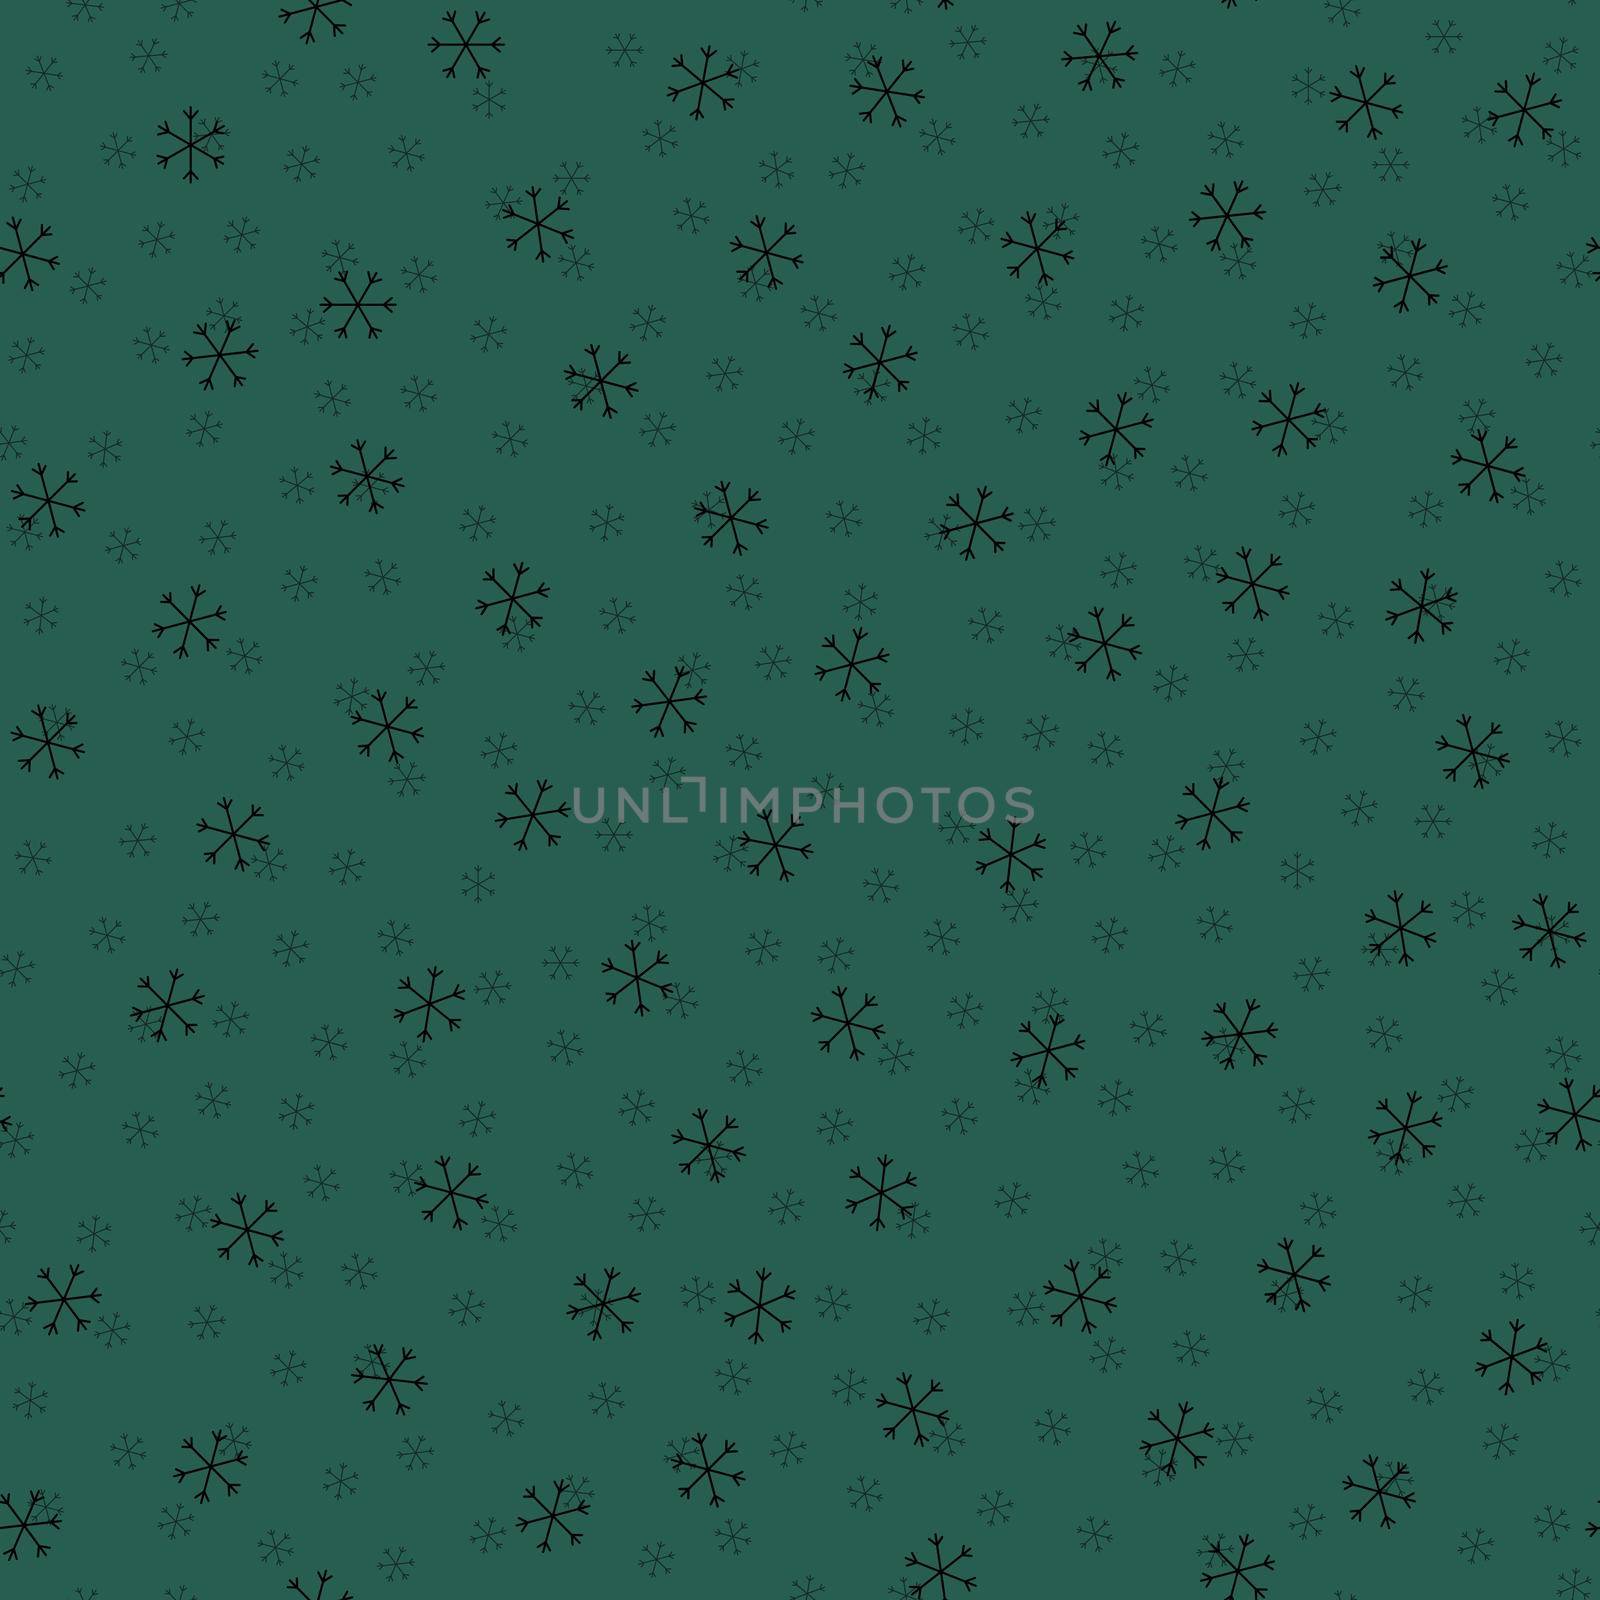 Seamless Christmas pattern doodle with hand random drawn snowflakes.Wrapping paper for presents, funny textile fabric print, design,decor, food wrap, backgrounds. new year.Raster copy.Green, black by Angelsmoon